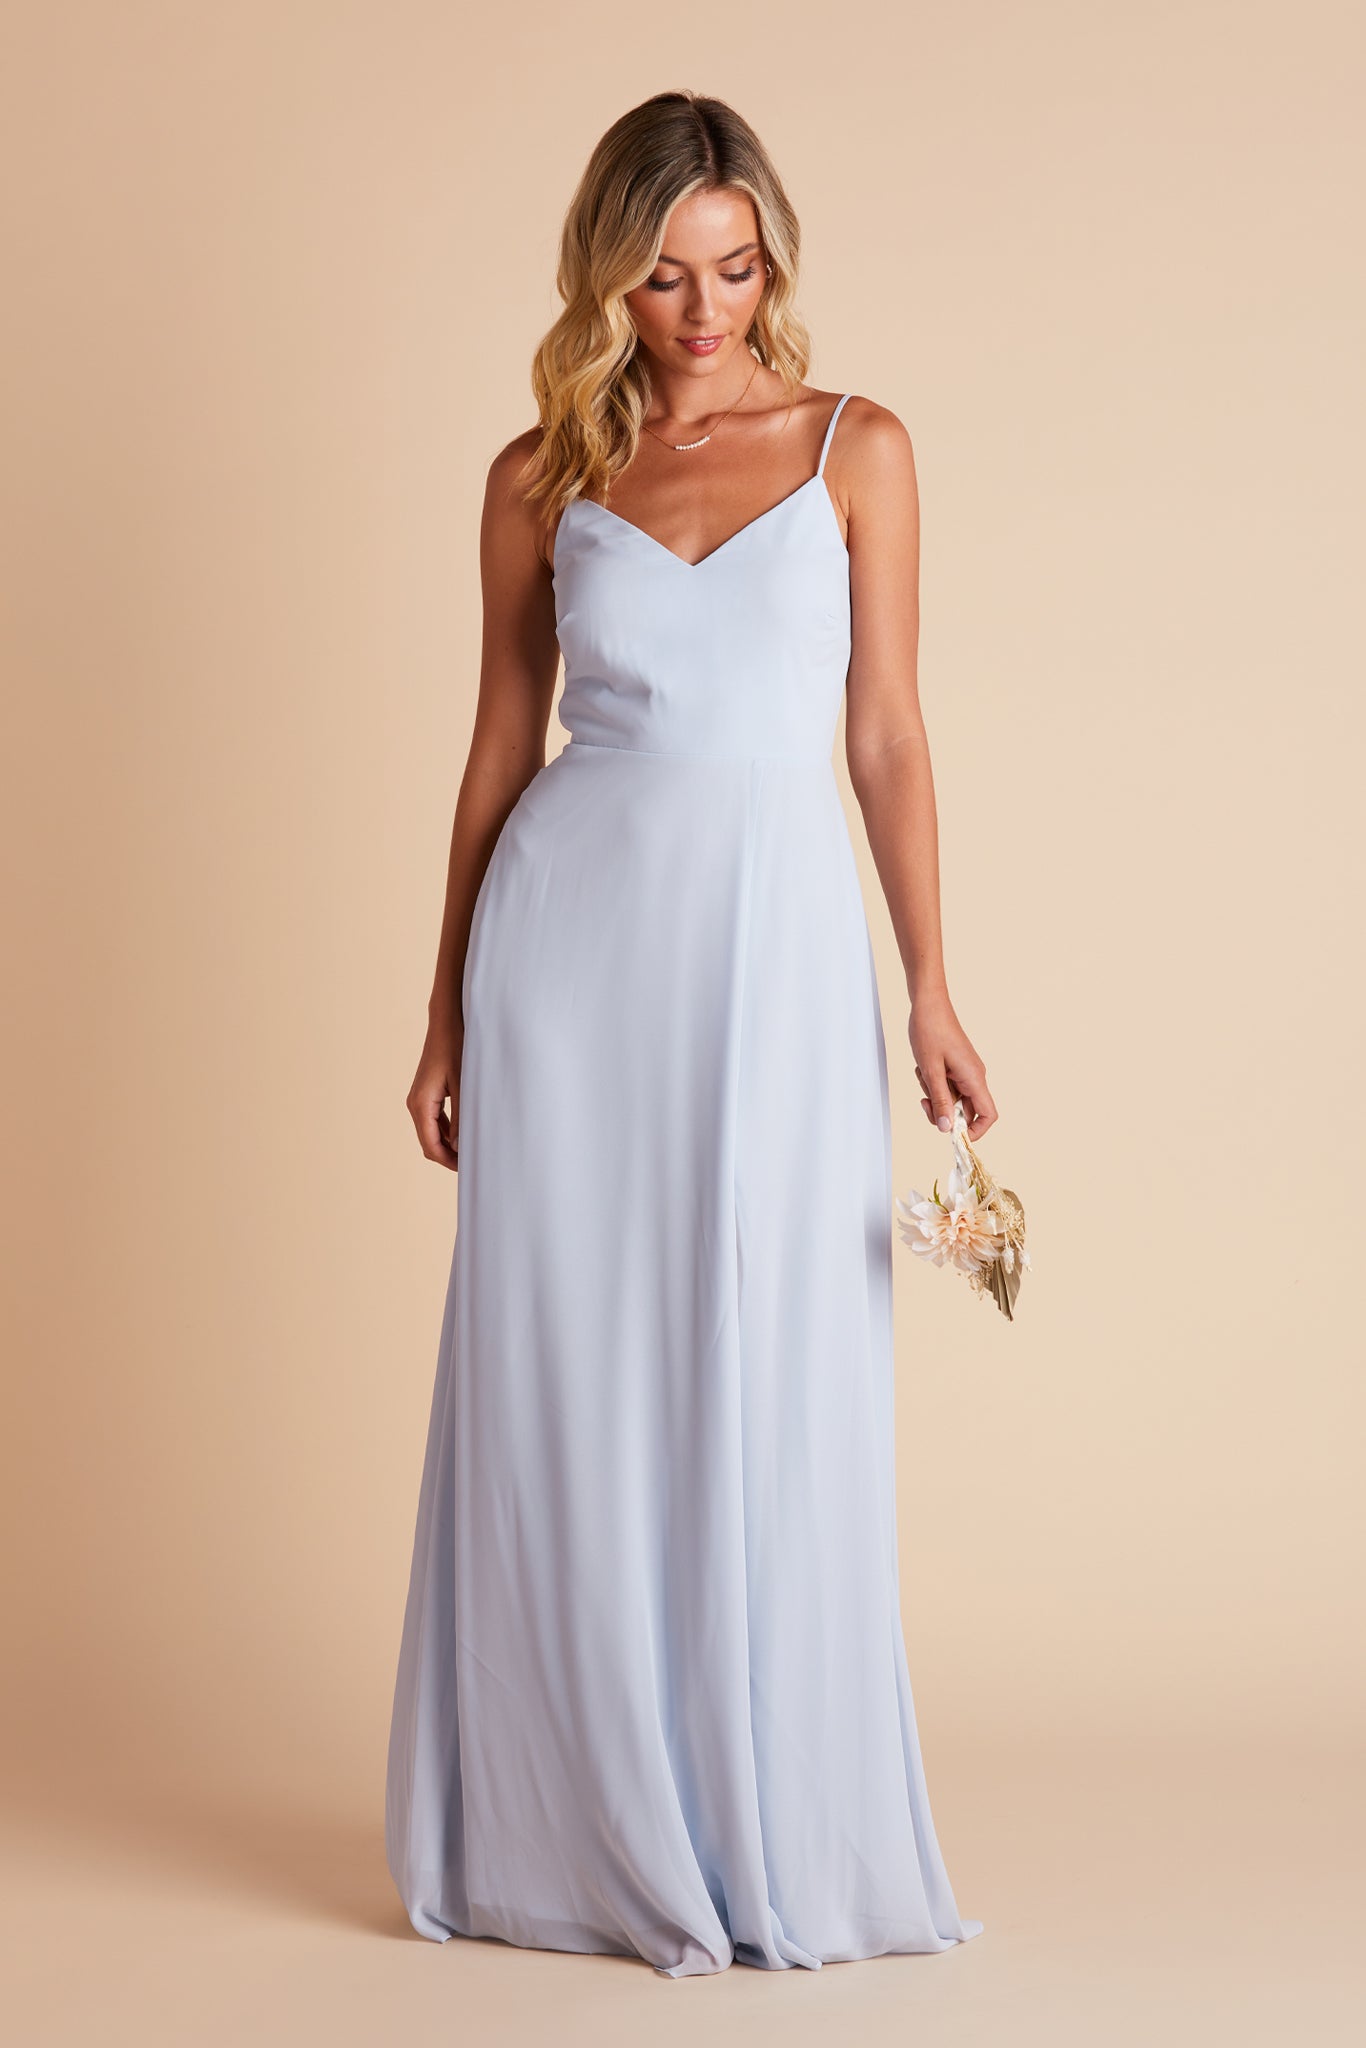 Devin convertible bridesmaid dress  in ice blue chiffon by Birdy Grey, front view